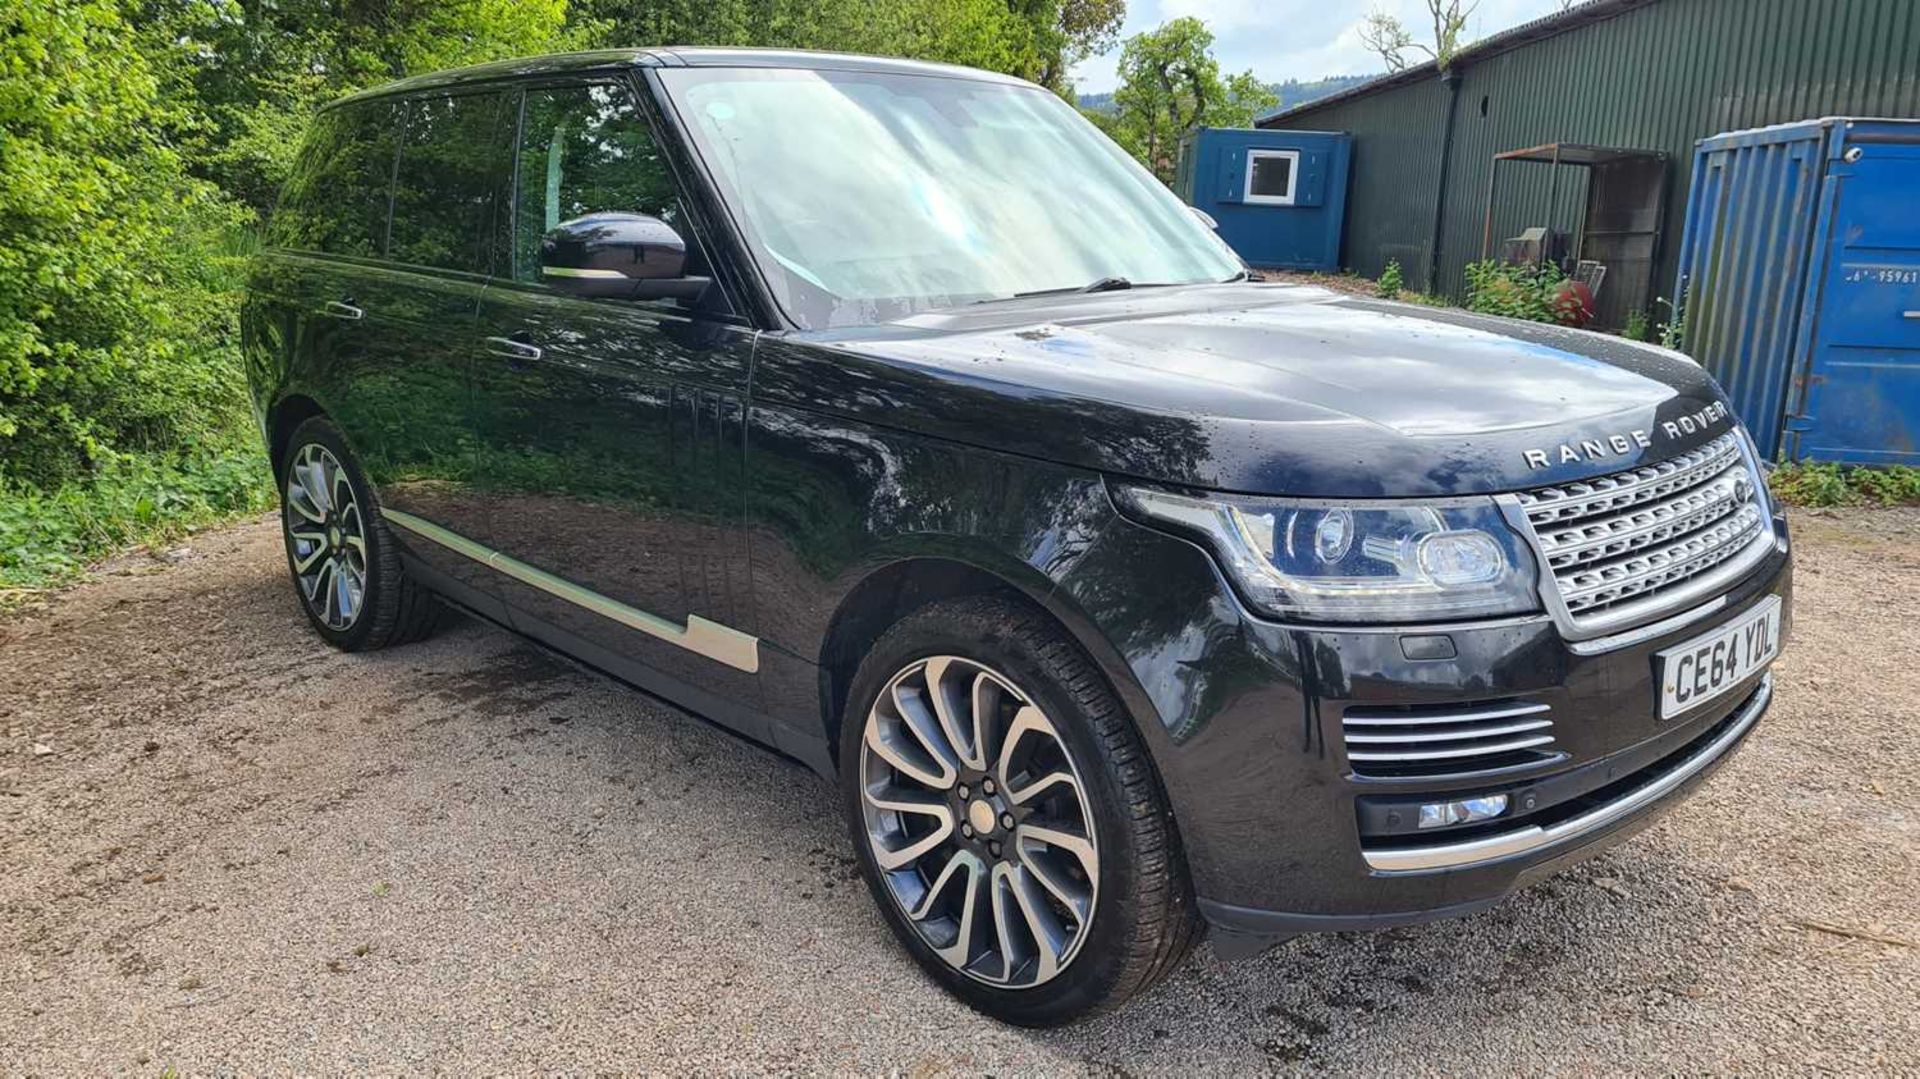 2014 Range Rover Autobiography SDV8, Auto, Paddle Shift, Parking Sensors, Full Leather, Heated Elect - Image 4 of 13